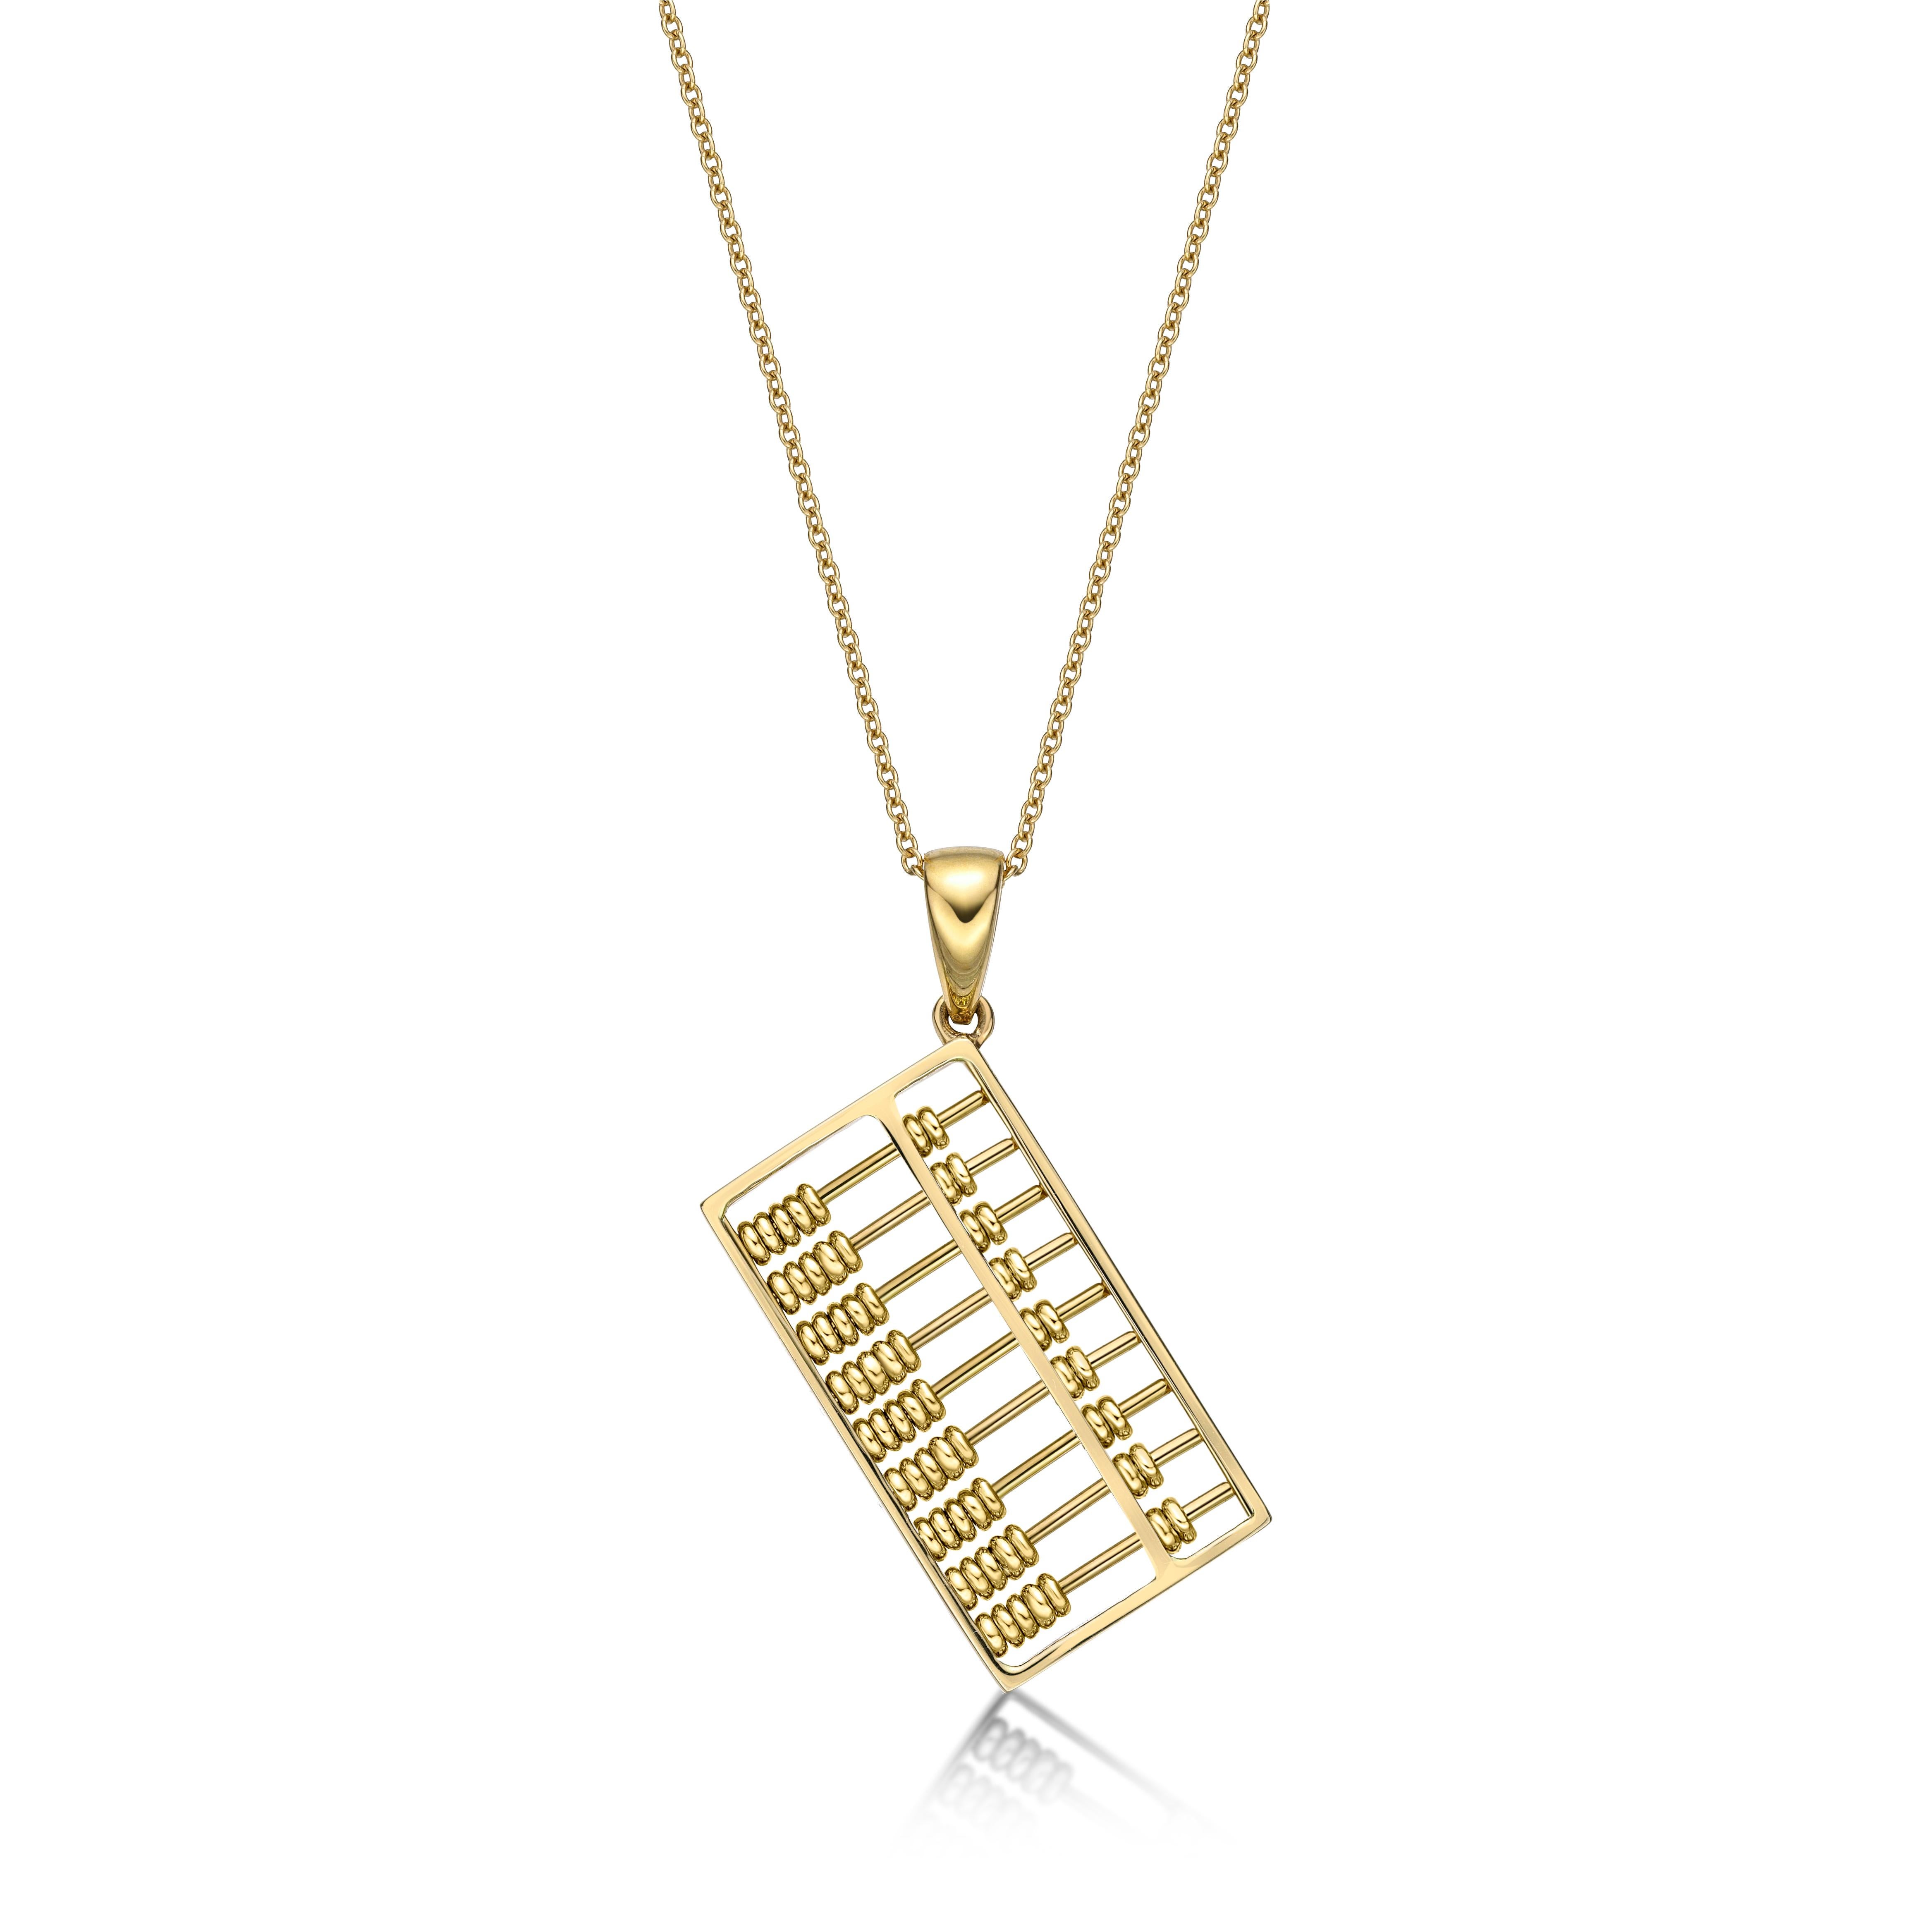 Abacus pendant with moving beads mounted in 18 Karat white gold.
Abacus, invented in ancient China  more than 2,600 years ago, is a traditional computing tool for businesses and widely used in Asian countries before the modern calculator was